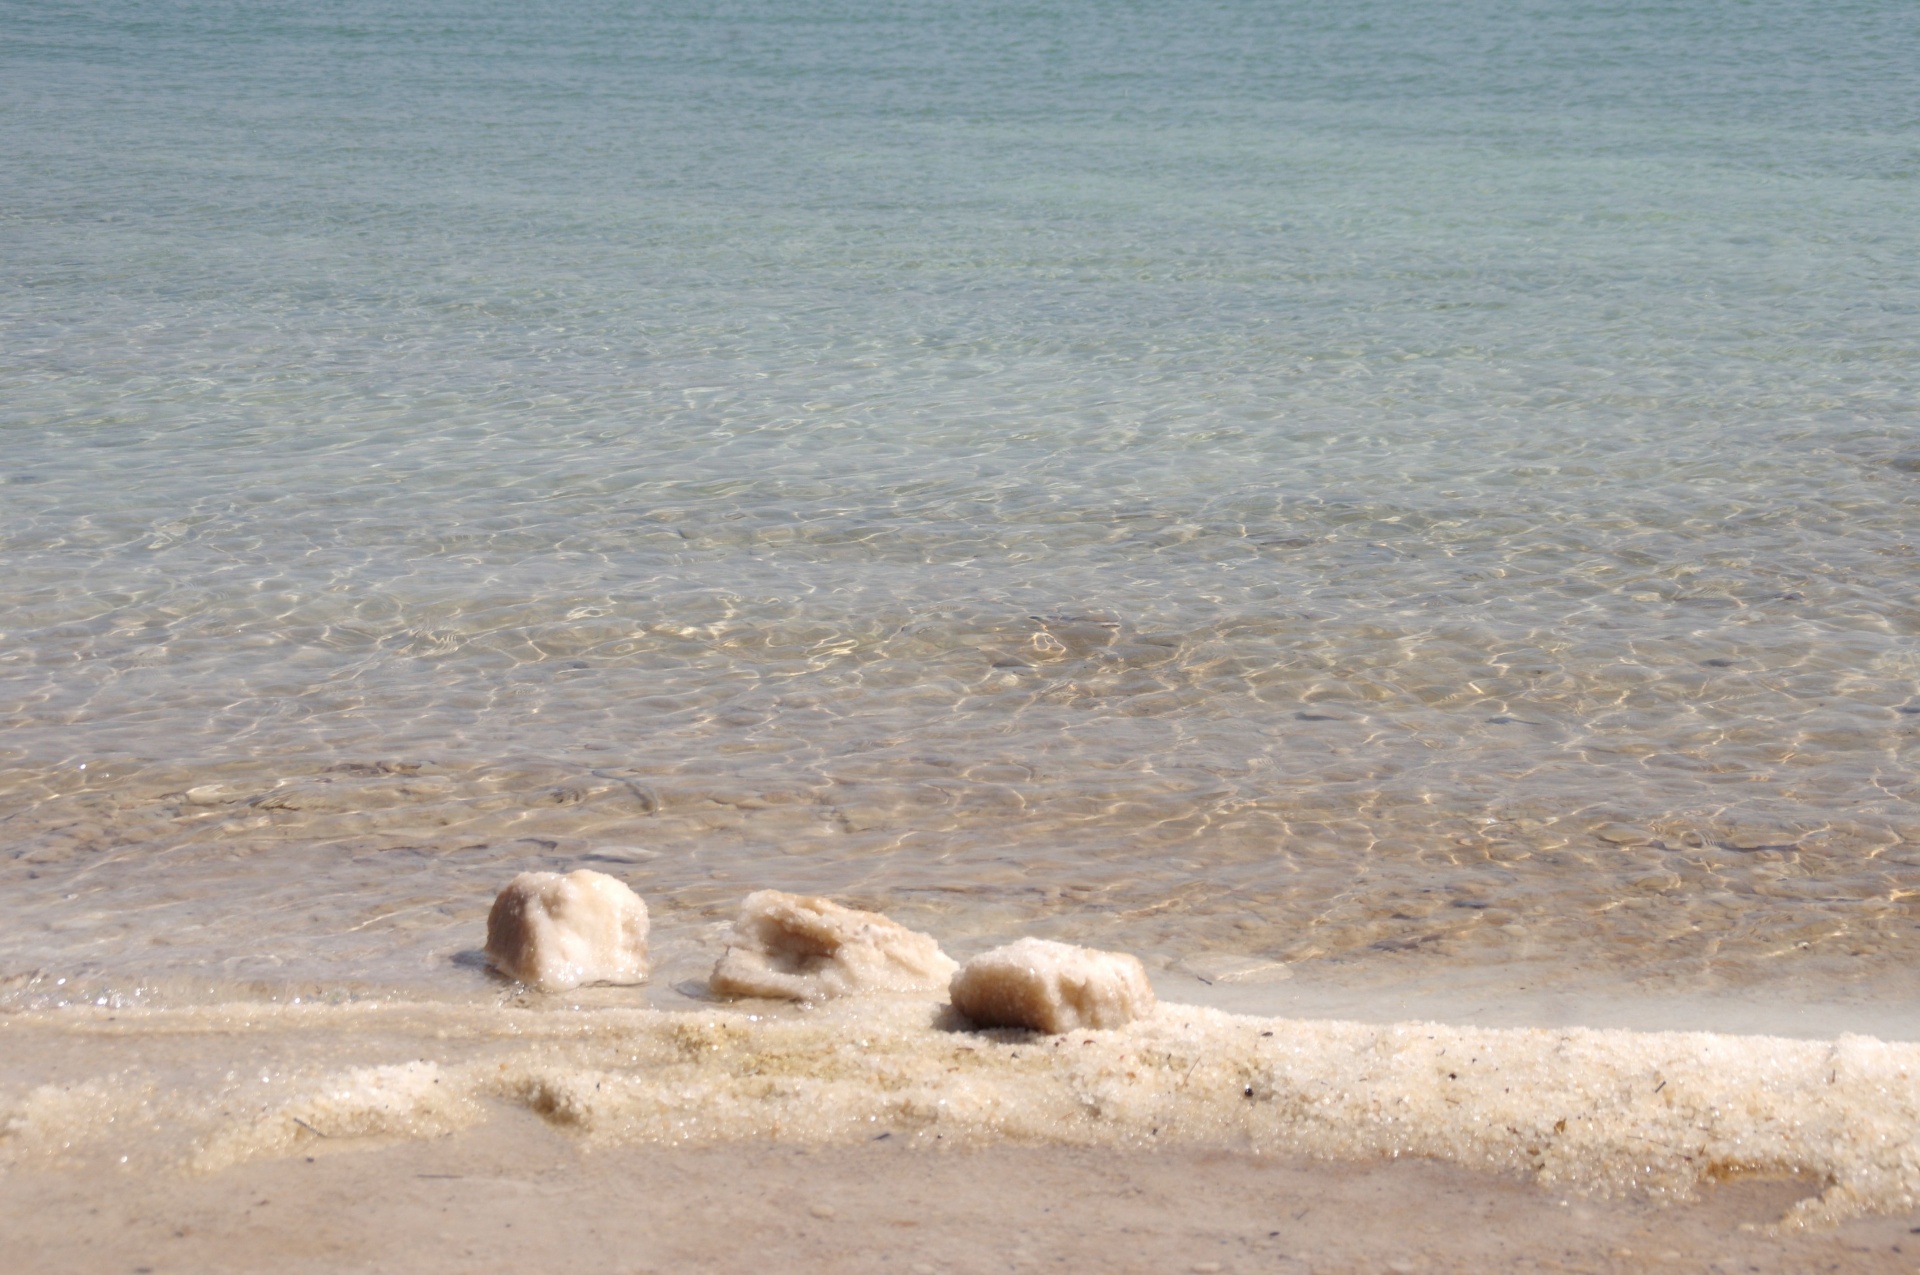 Clumps of large salt rocks at edge of the Dead Sea beach